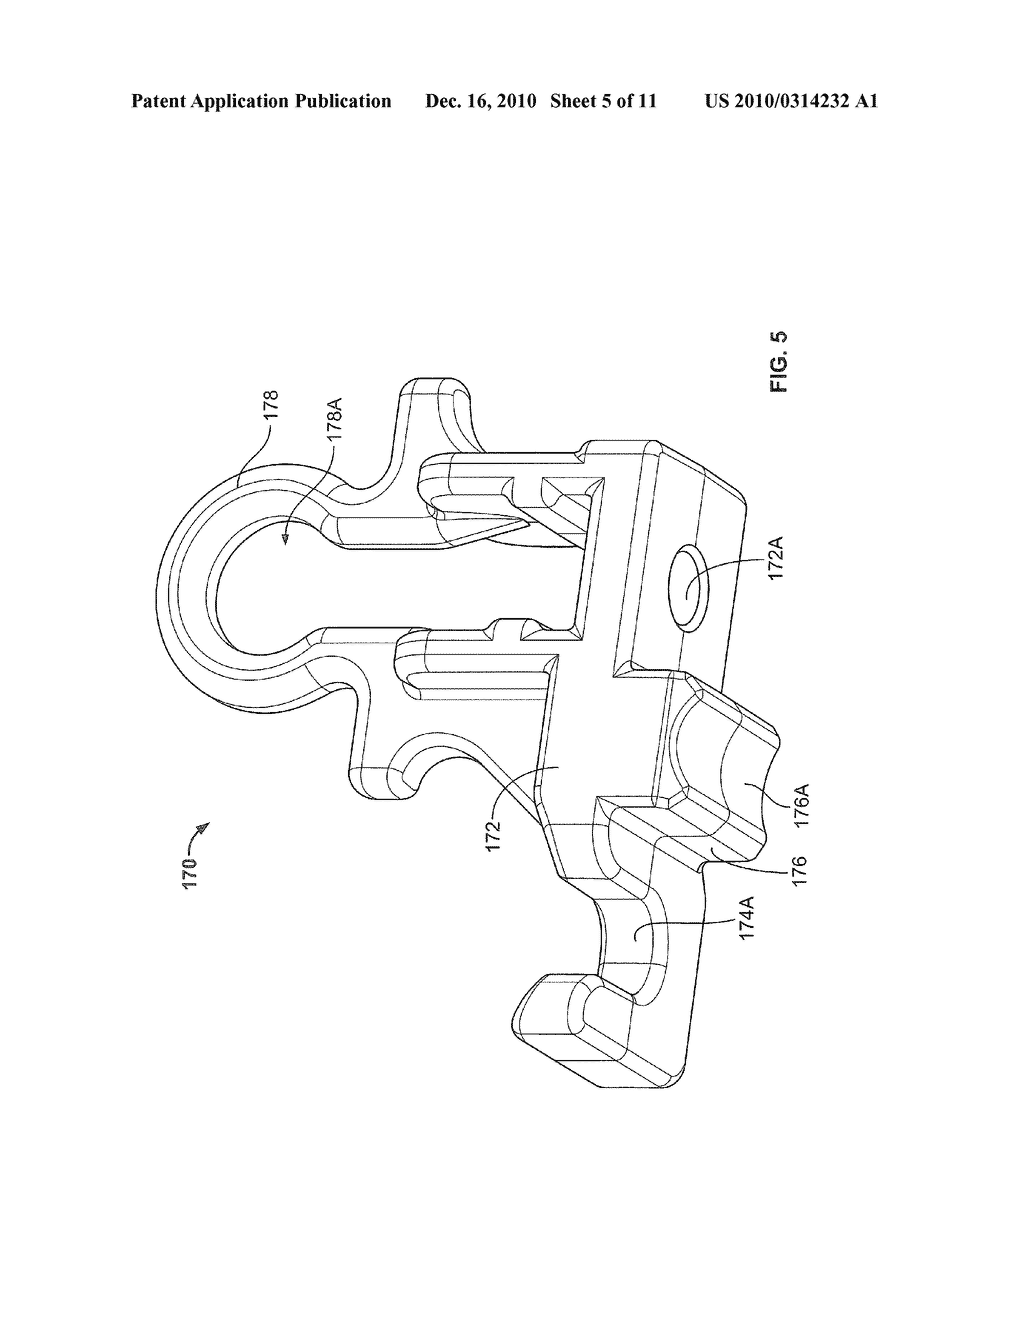 CABLE TERMINATION SYSTEMS AND ISOLATING APPARATUS FOR ELECTRICAL POWER TRANSMISSION CONDUCTORS AND METHODS USING THE SAME - diagram, schematic, and image 06